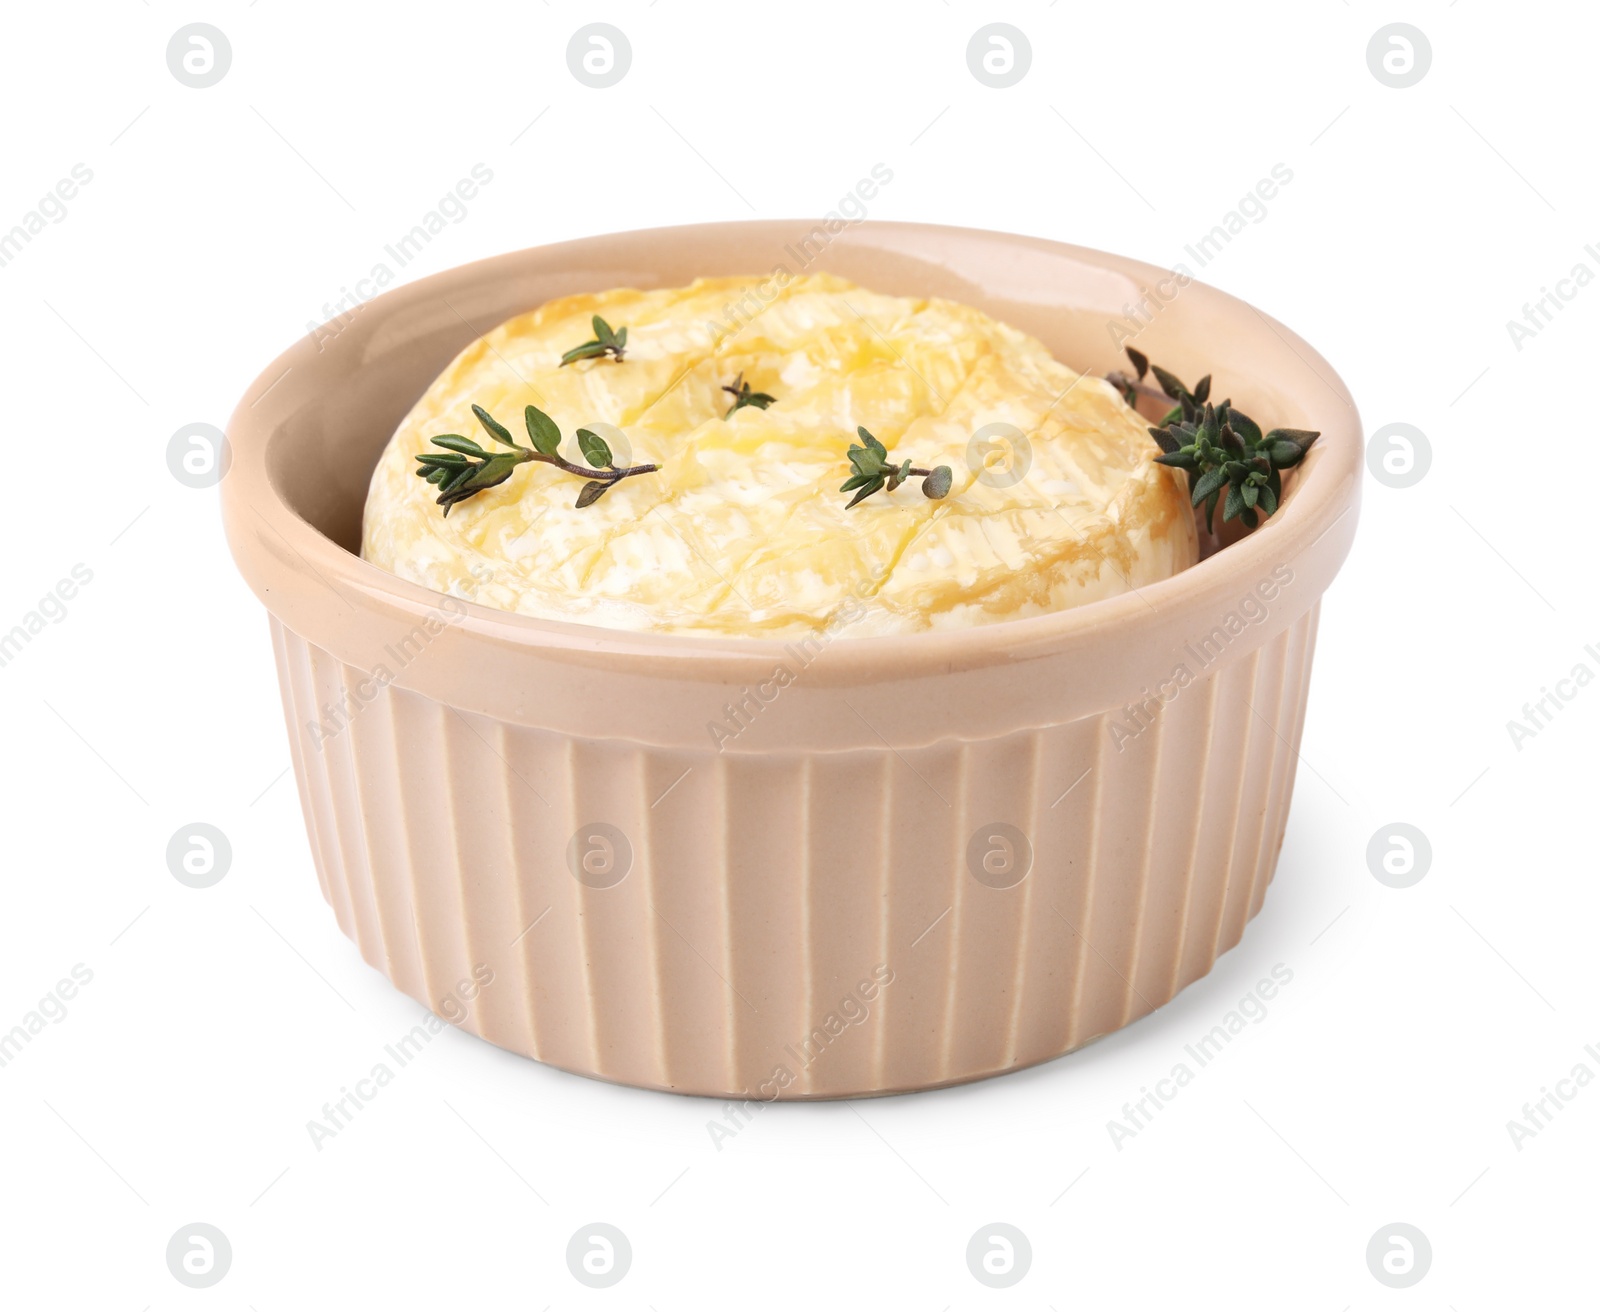 Photo of Tasty baked camembert and thyme in bowl on white background